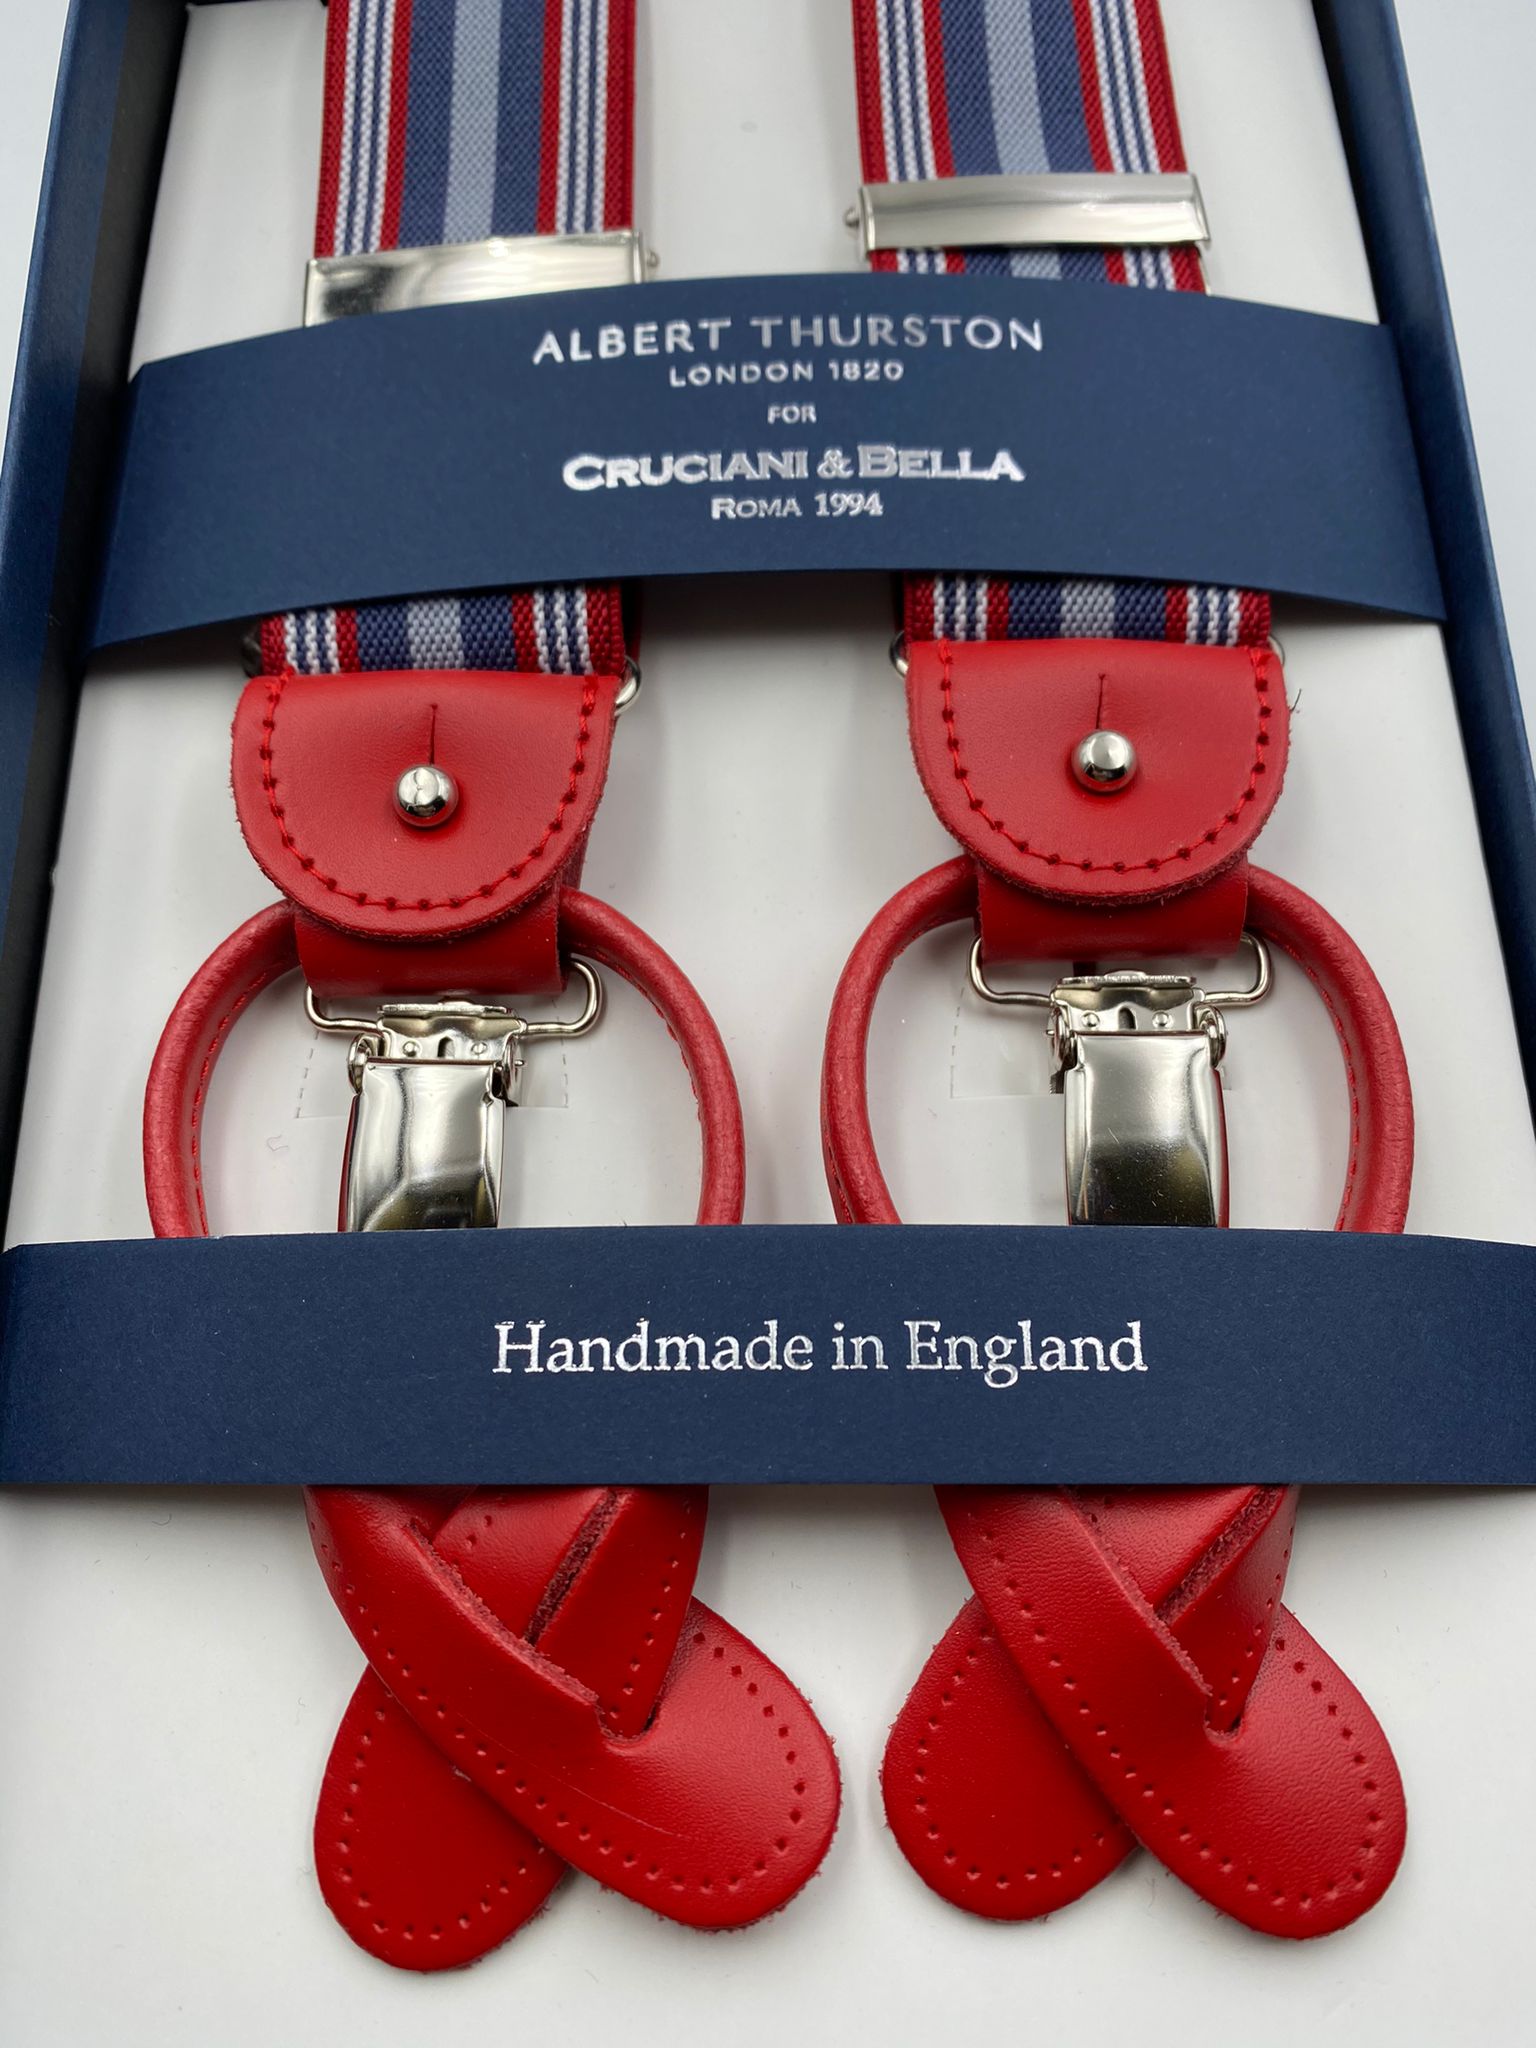 Albert Thurston for Cruciani & Bella Made in England 2 in 1 Adjustable Sizing 35 mm elastic braces Light Blue, Grey and Red Stripes Y-Shaped Nickel Fittings #4875